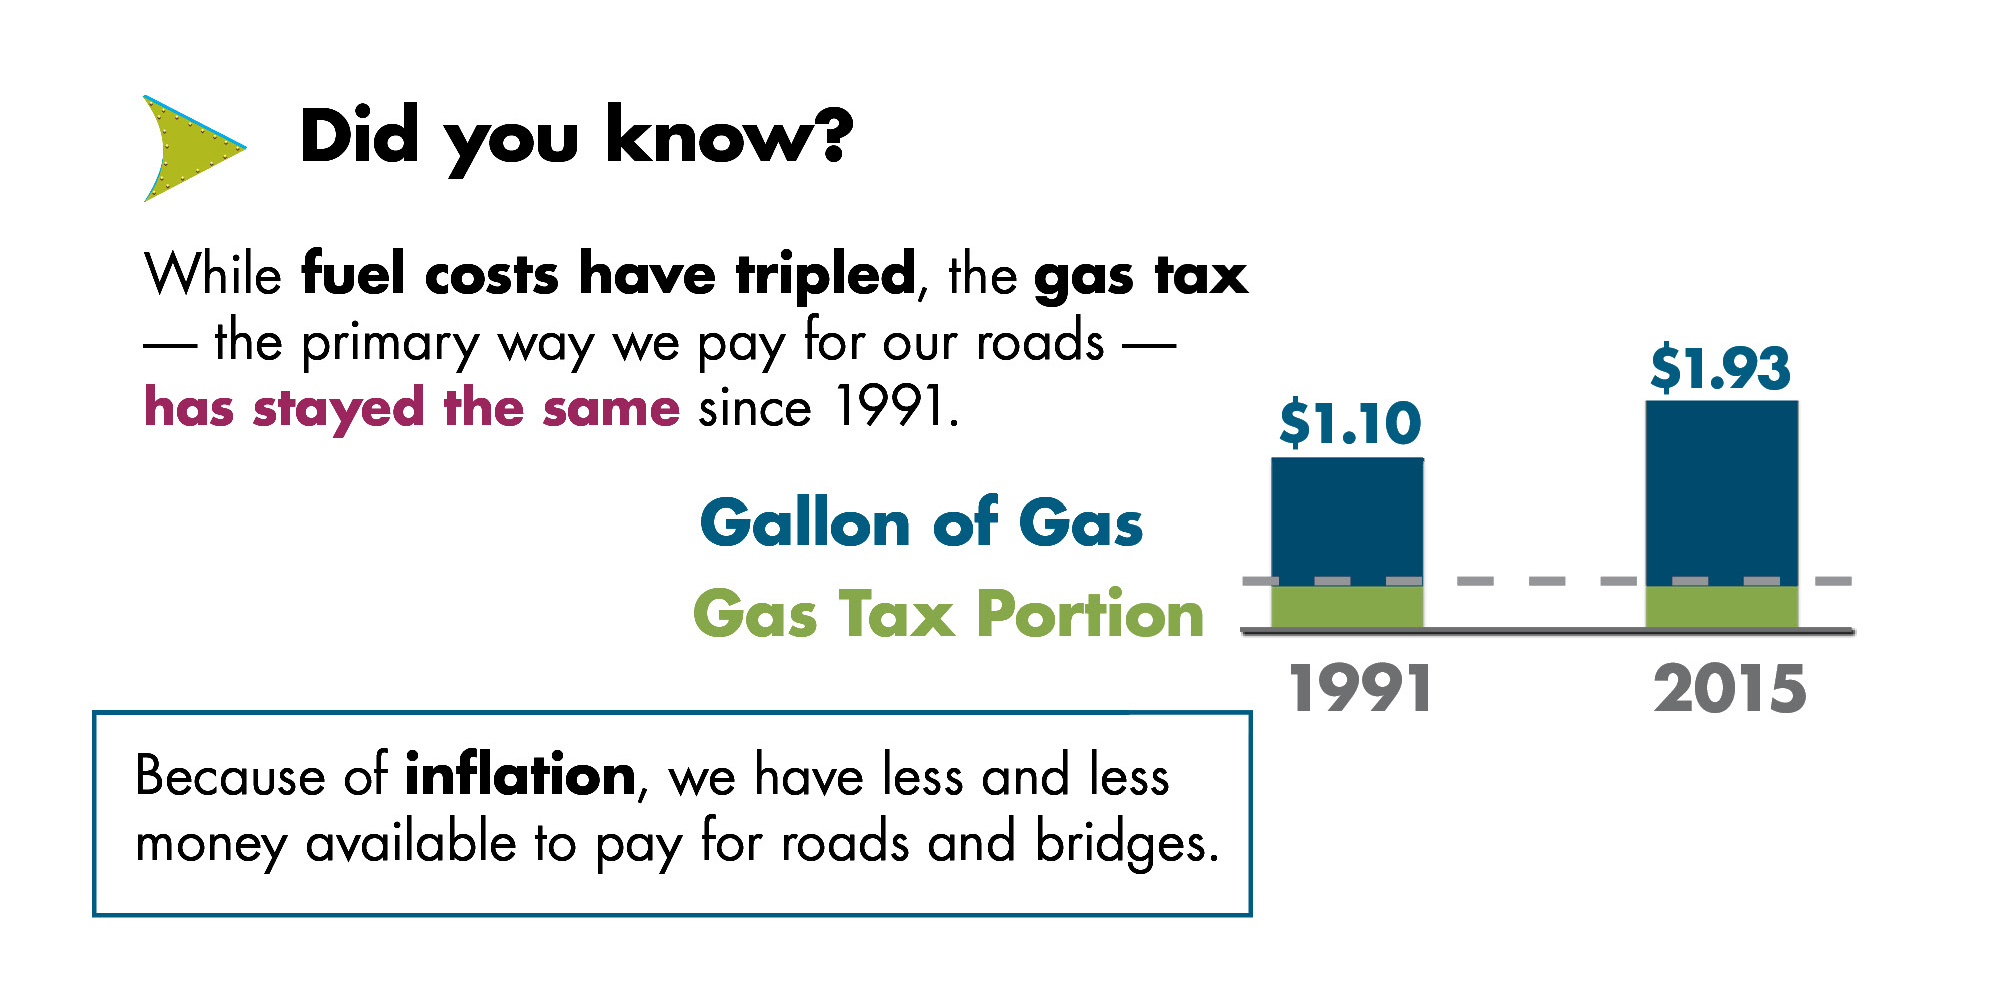 Did you know? While fuel costs have tripled, the gas tax -- the primary way we pay for our roads -- has stayed the same since 1991. Gas in 1991 was $1.10 per gallon.  In 2015, it was $1.93 per gallon.  Because of inflation, we have less and less money available to pay for roads and bridges.